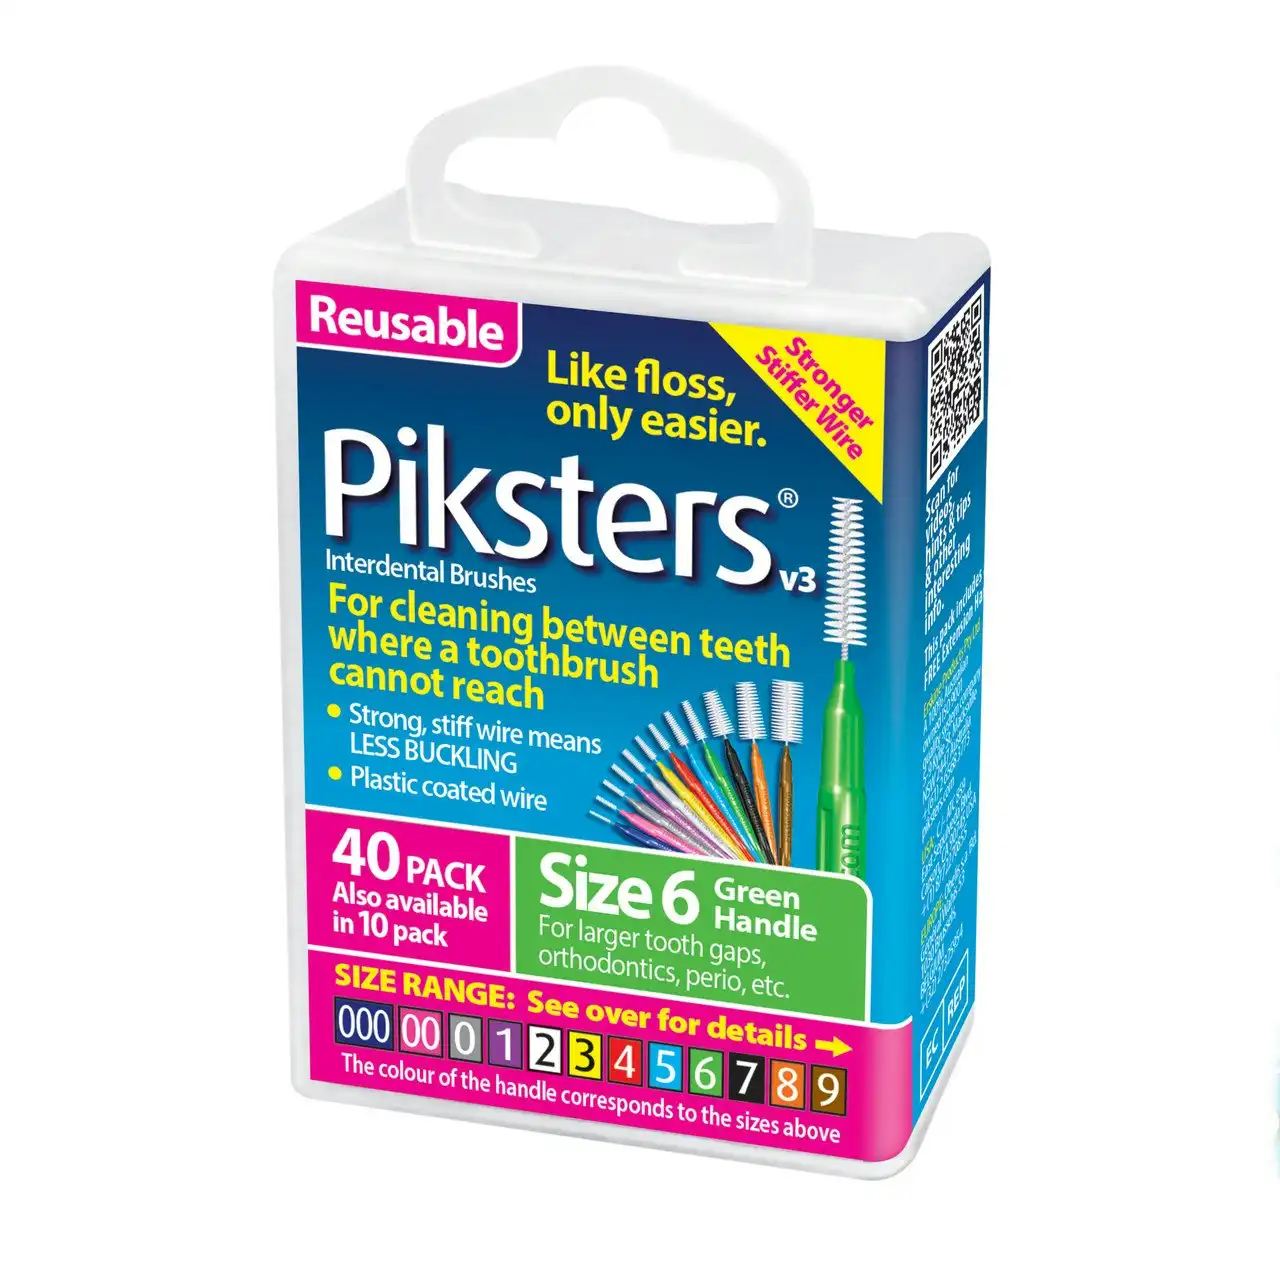 Piksters(R) Interdental Brushes Green Size 6 40pk